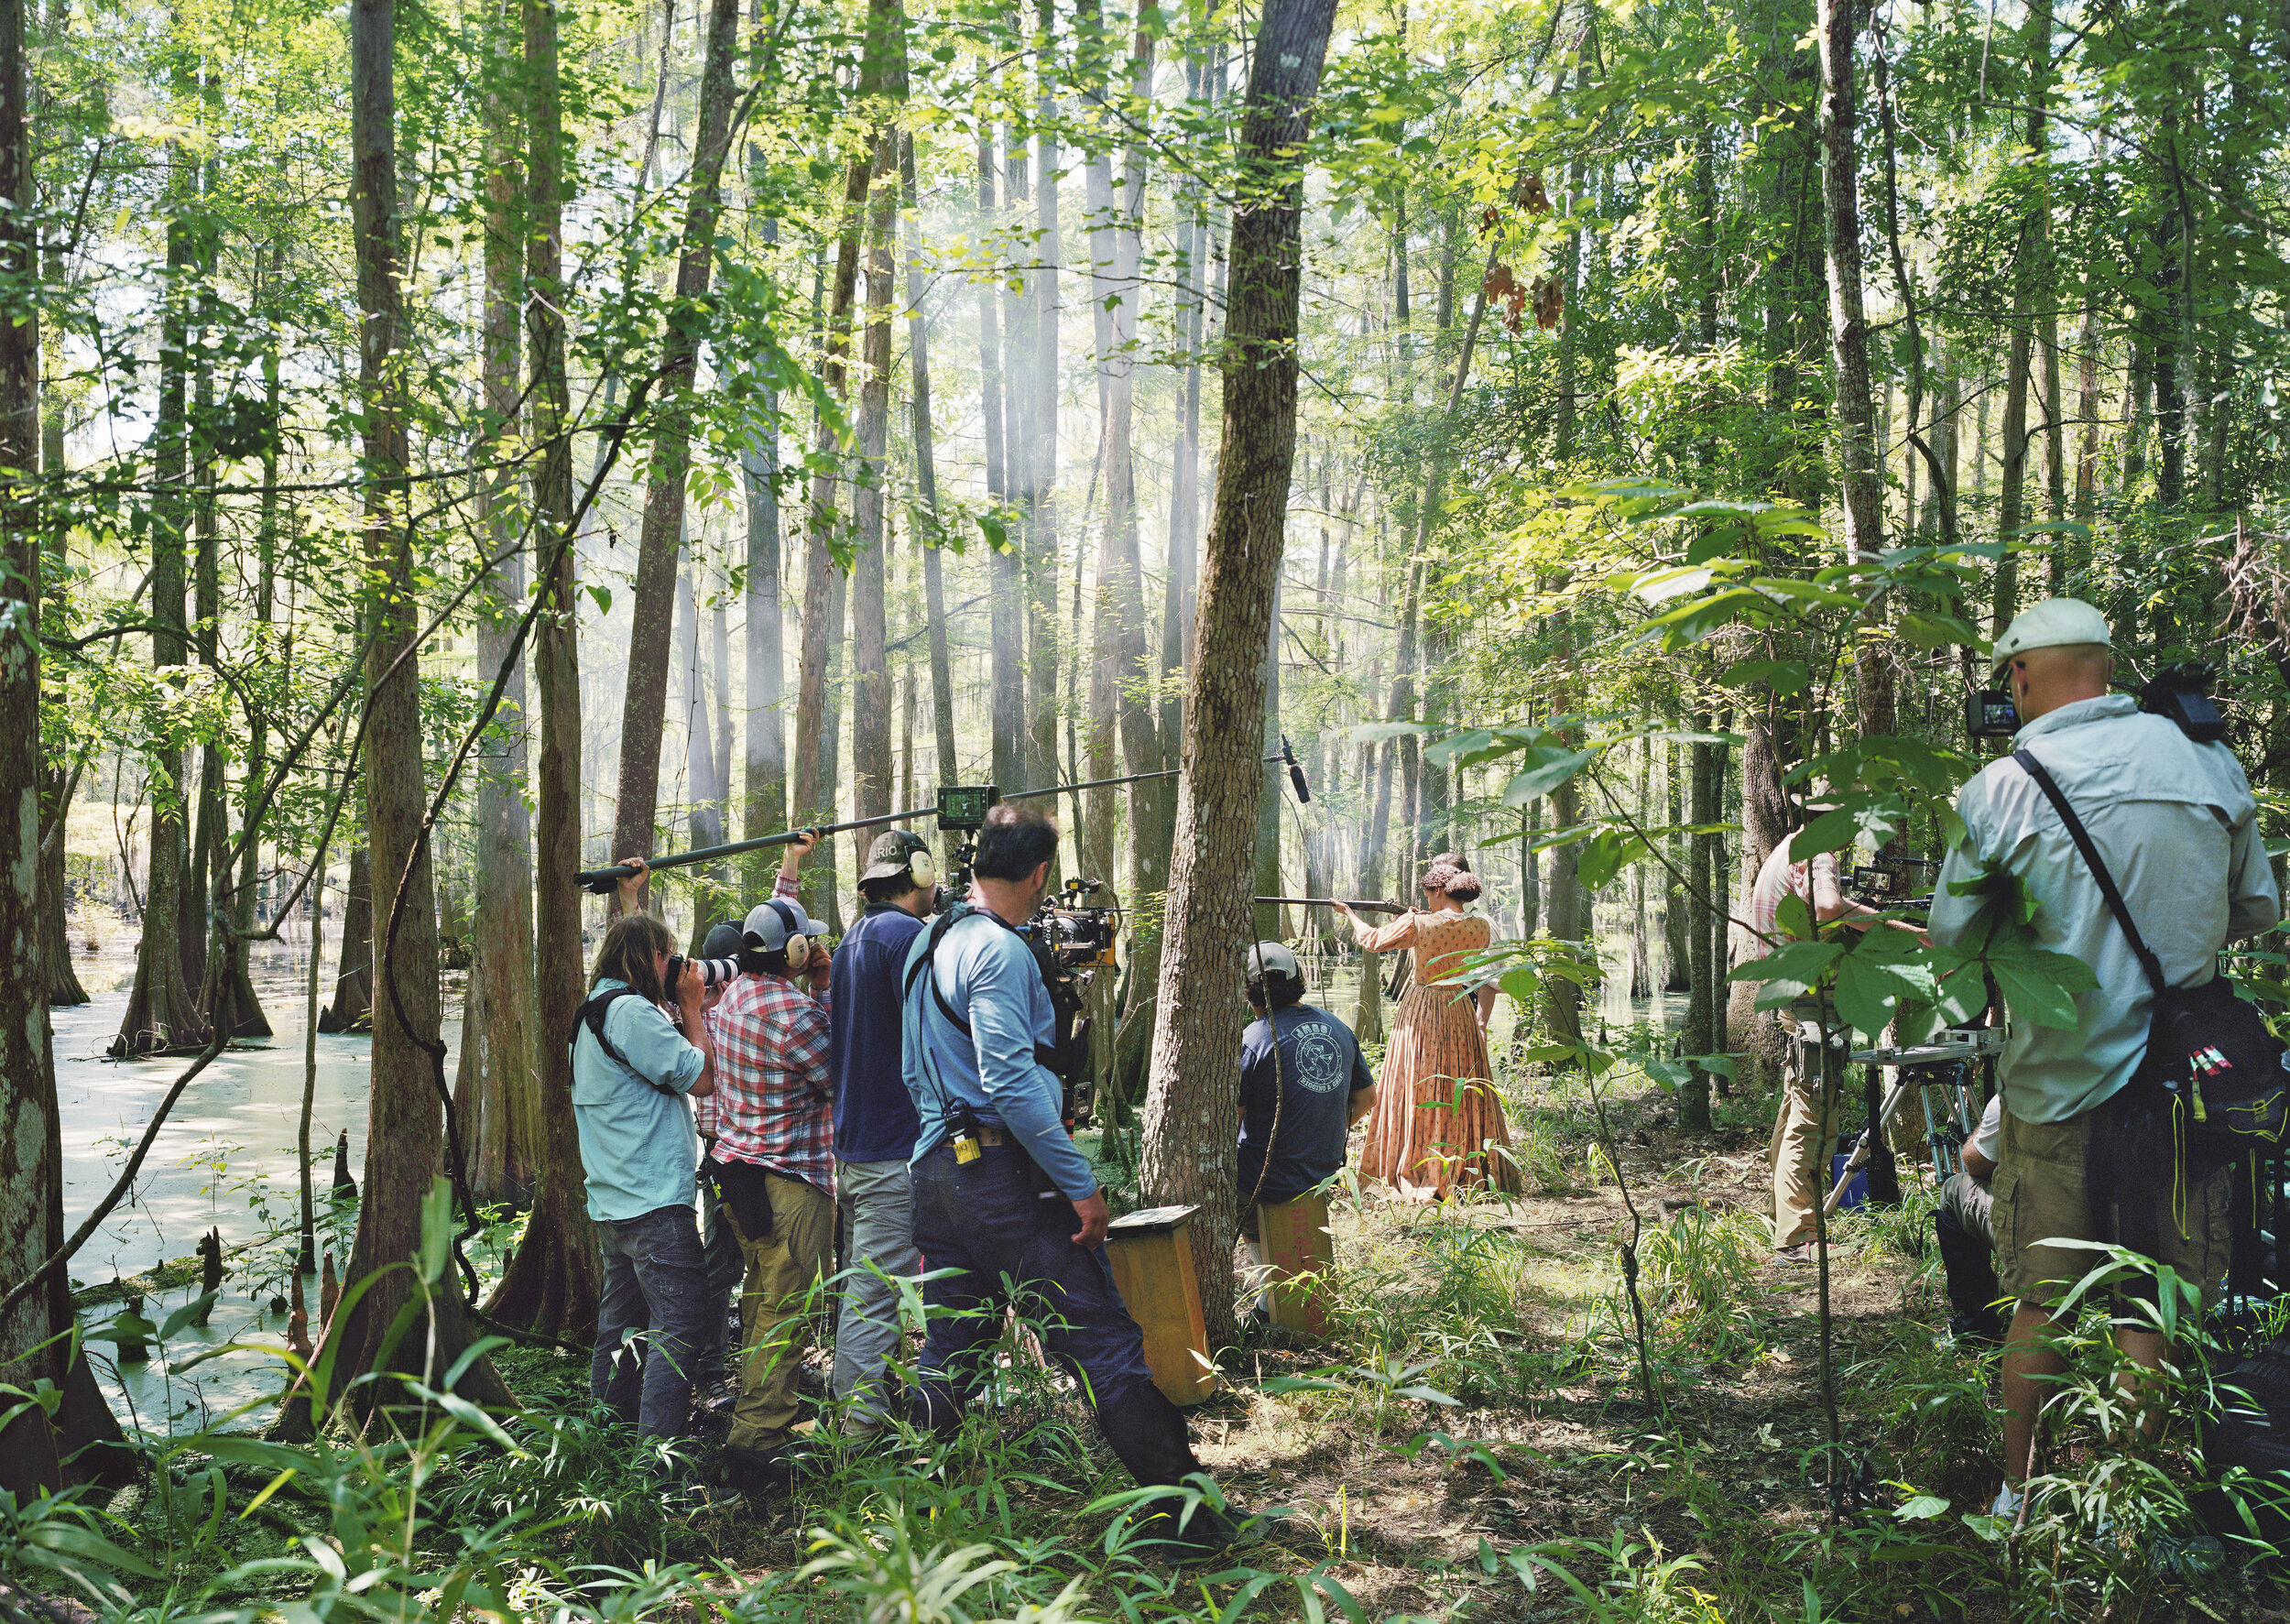 Firing Lesson, Film Set ("Free State of Jones"), Chicot State Park, Louisiana, 2015